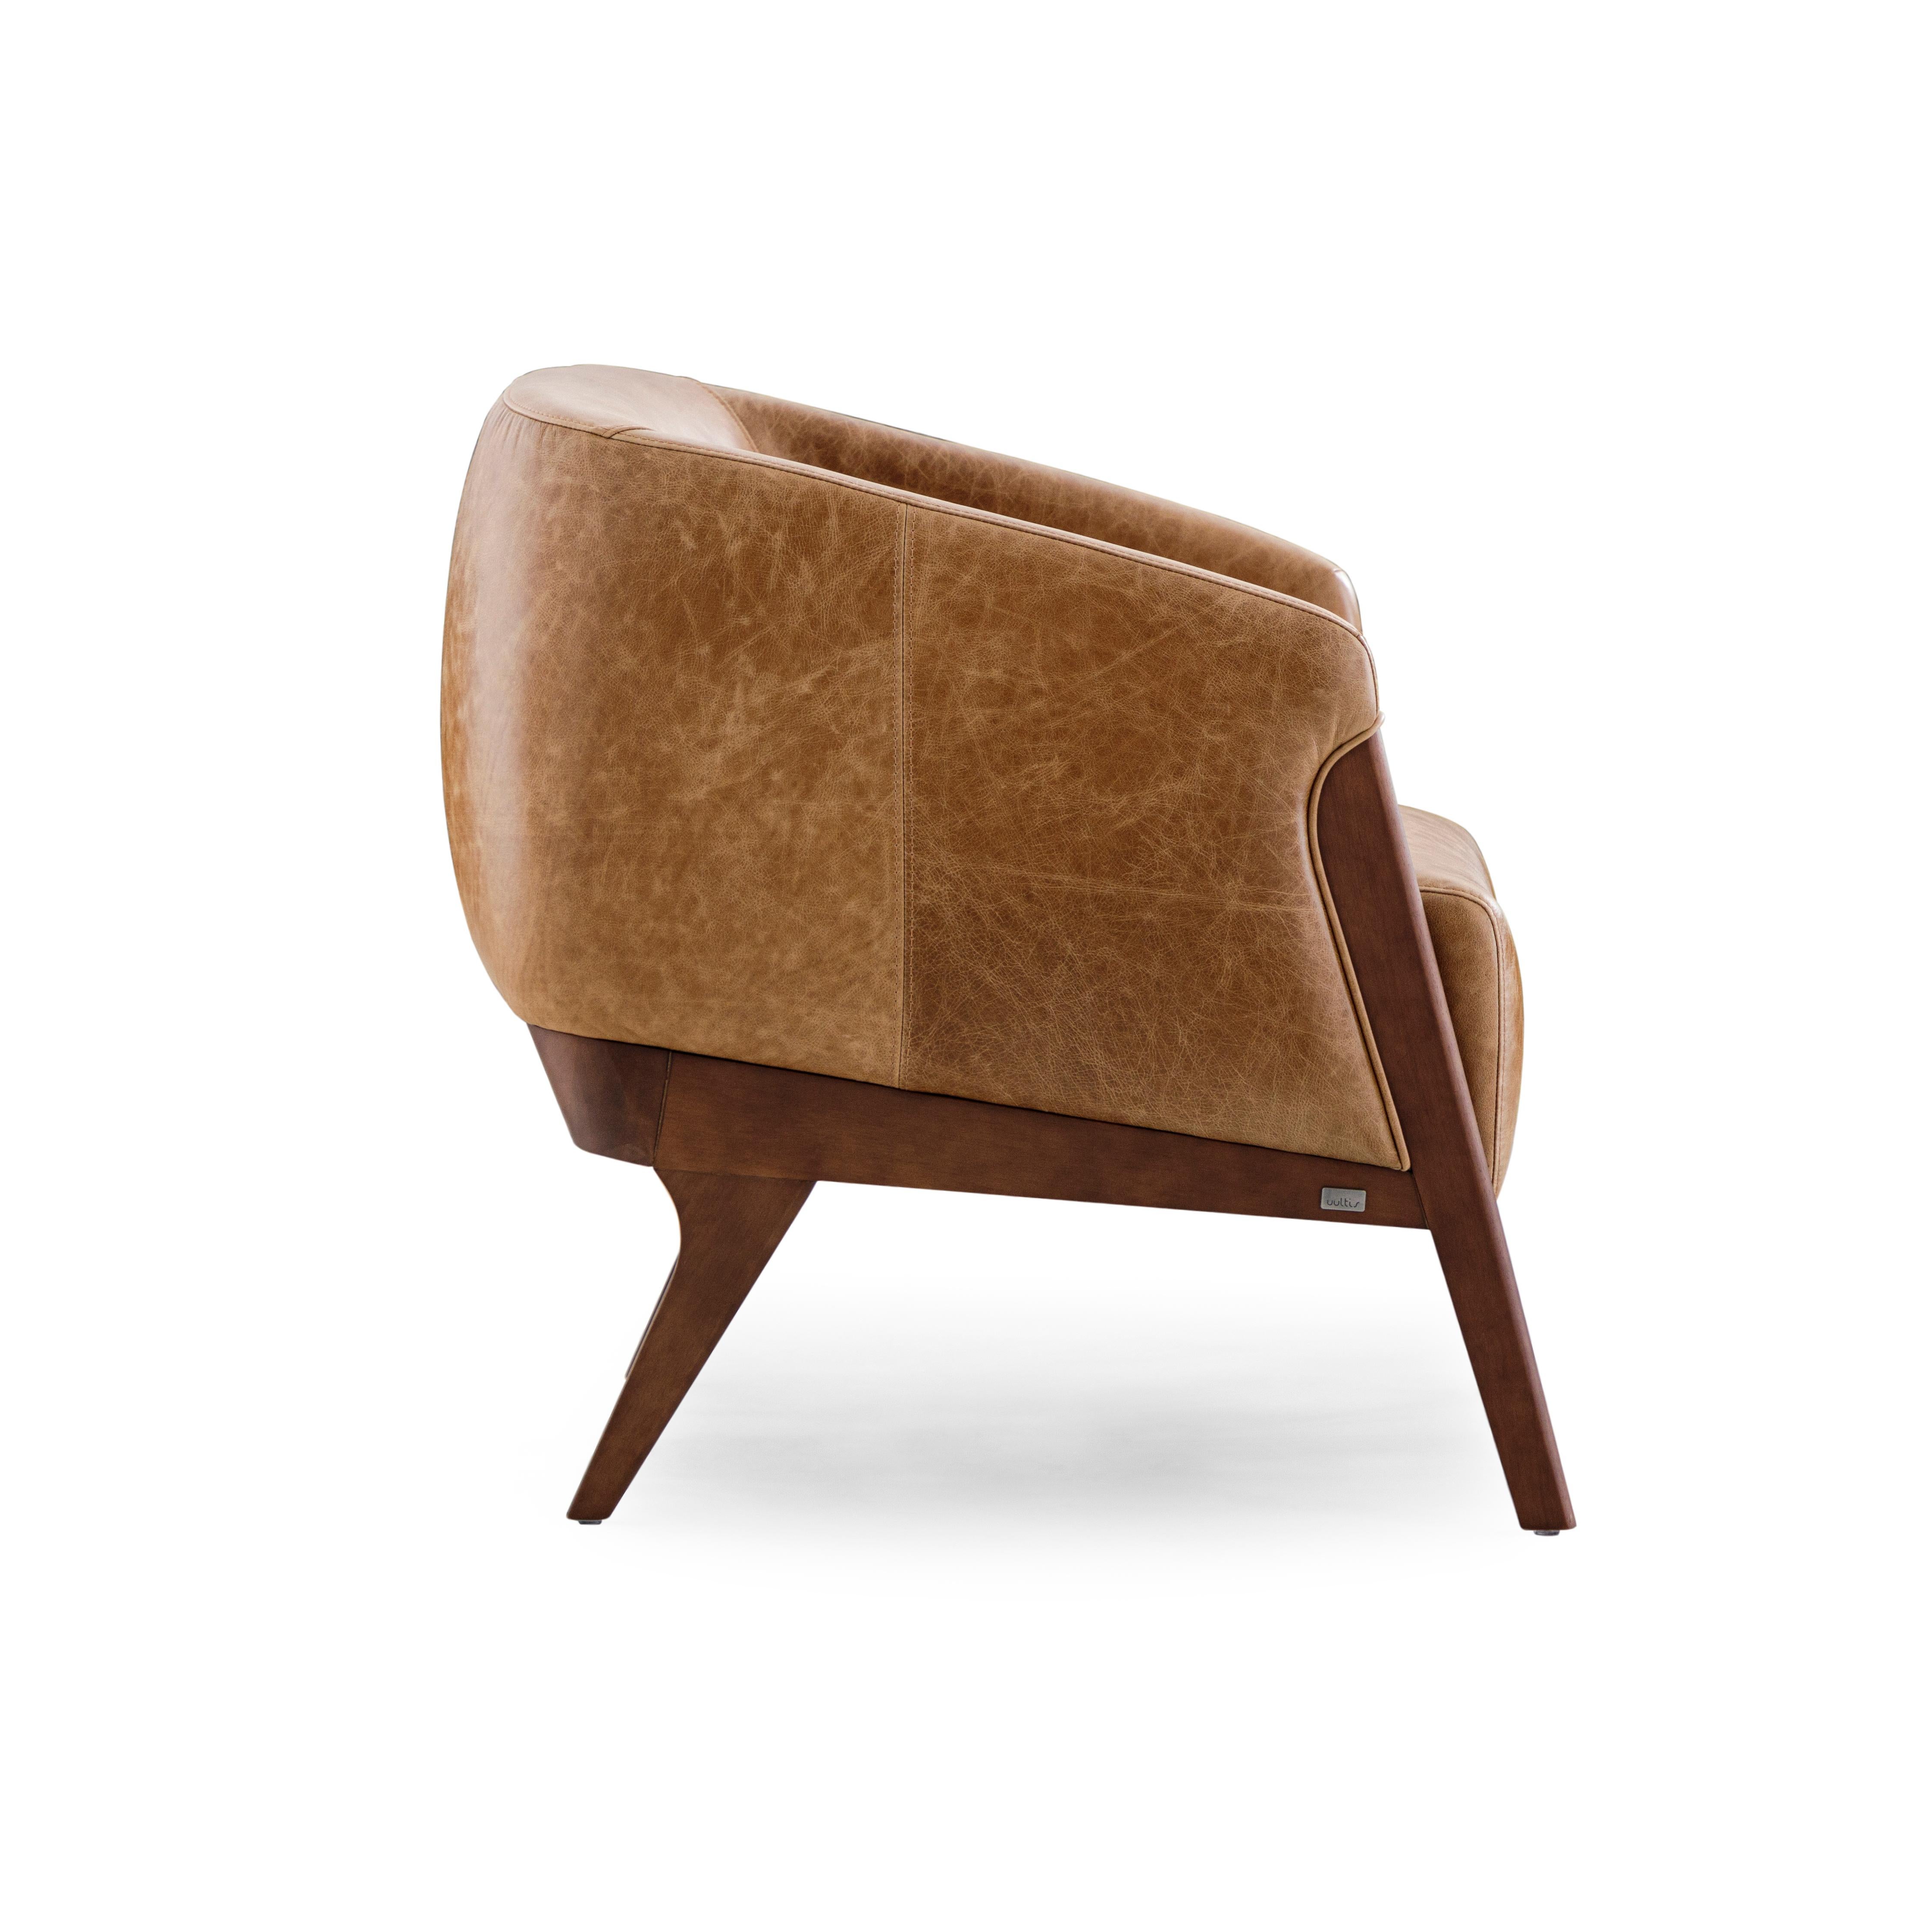 The Abra armchair is a welcoming addition to any room in your decor, with beautiful brown leather upholstery and a walnut wood frame. This armchair has been created by our amazing team of architectors and designers from Uultis in order to bring